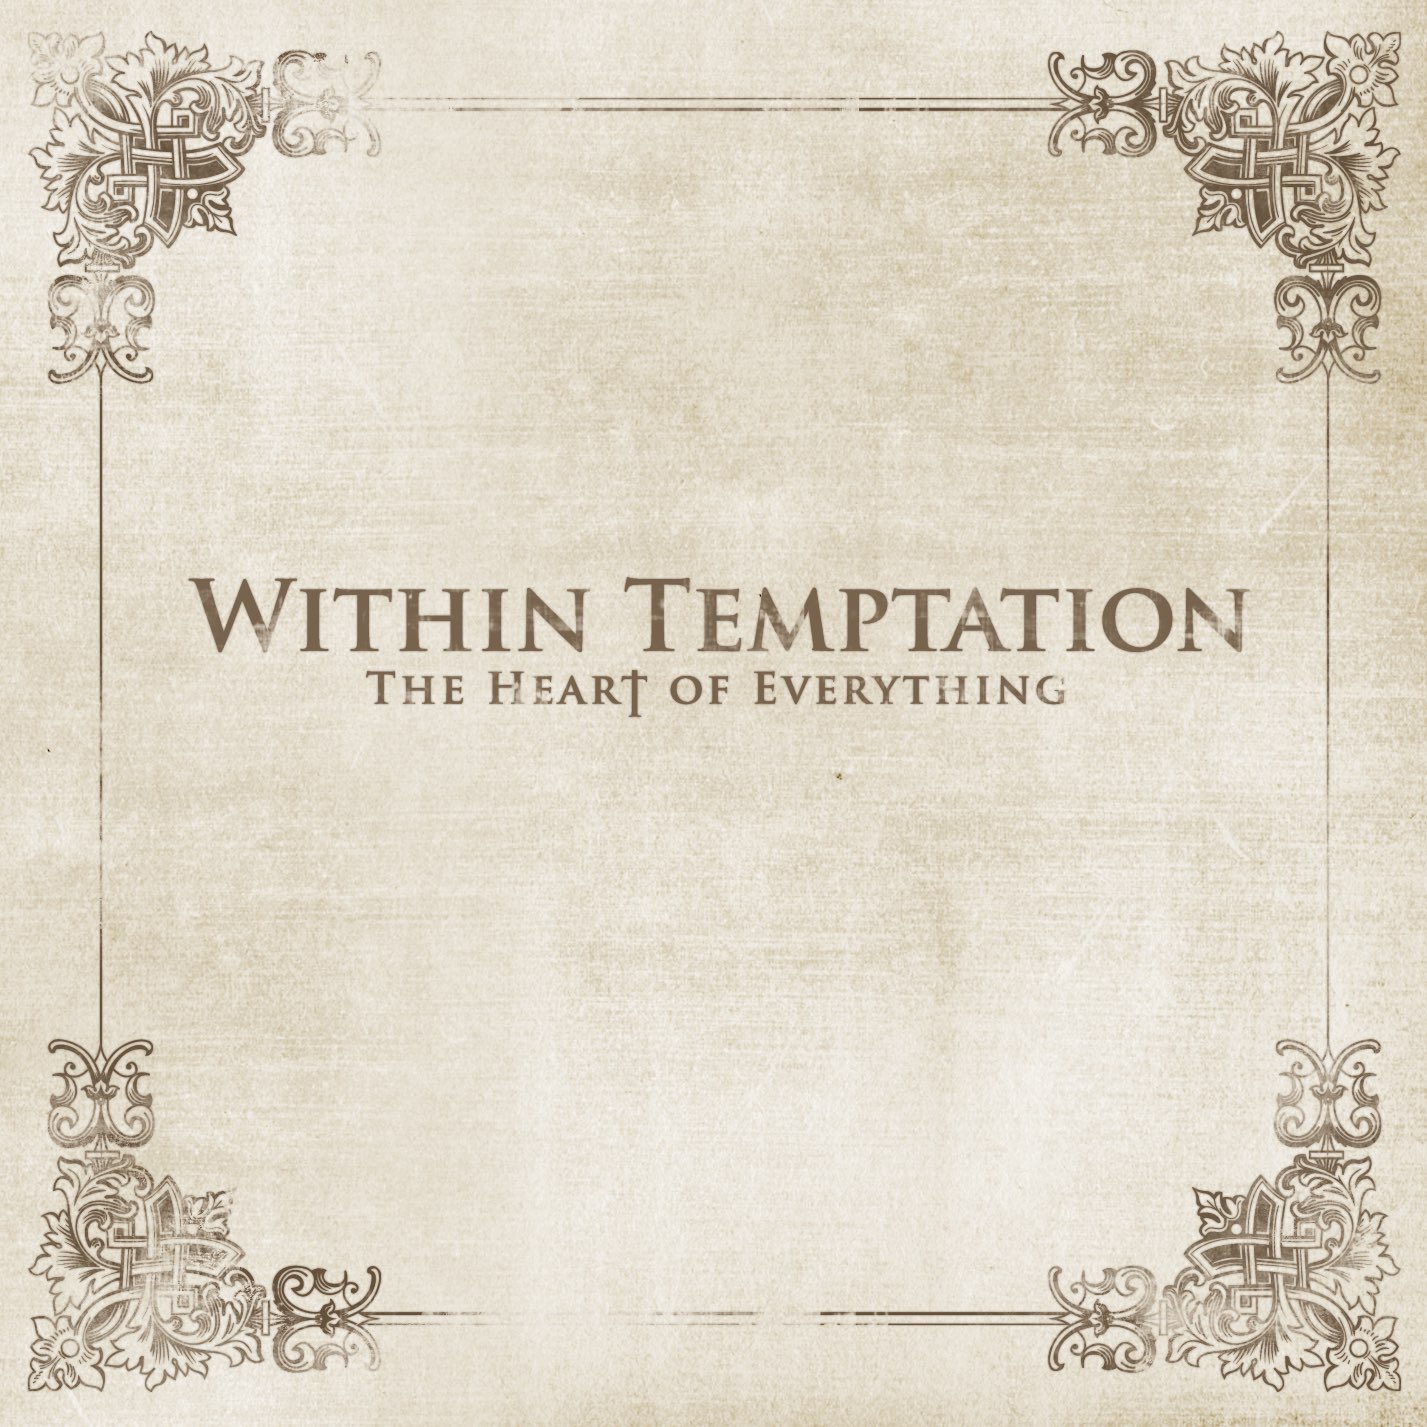 Heart of Everything Within Temptation album 2007